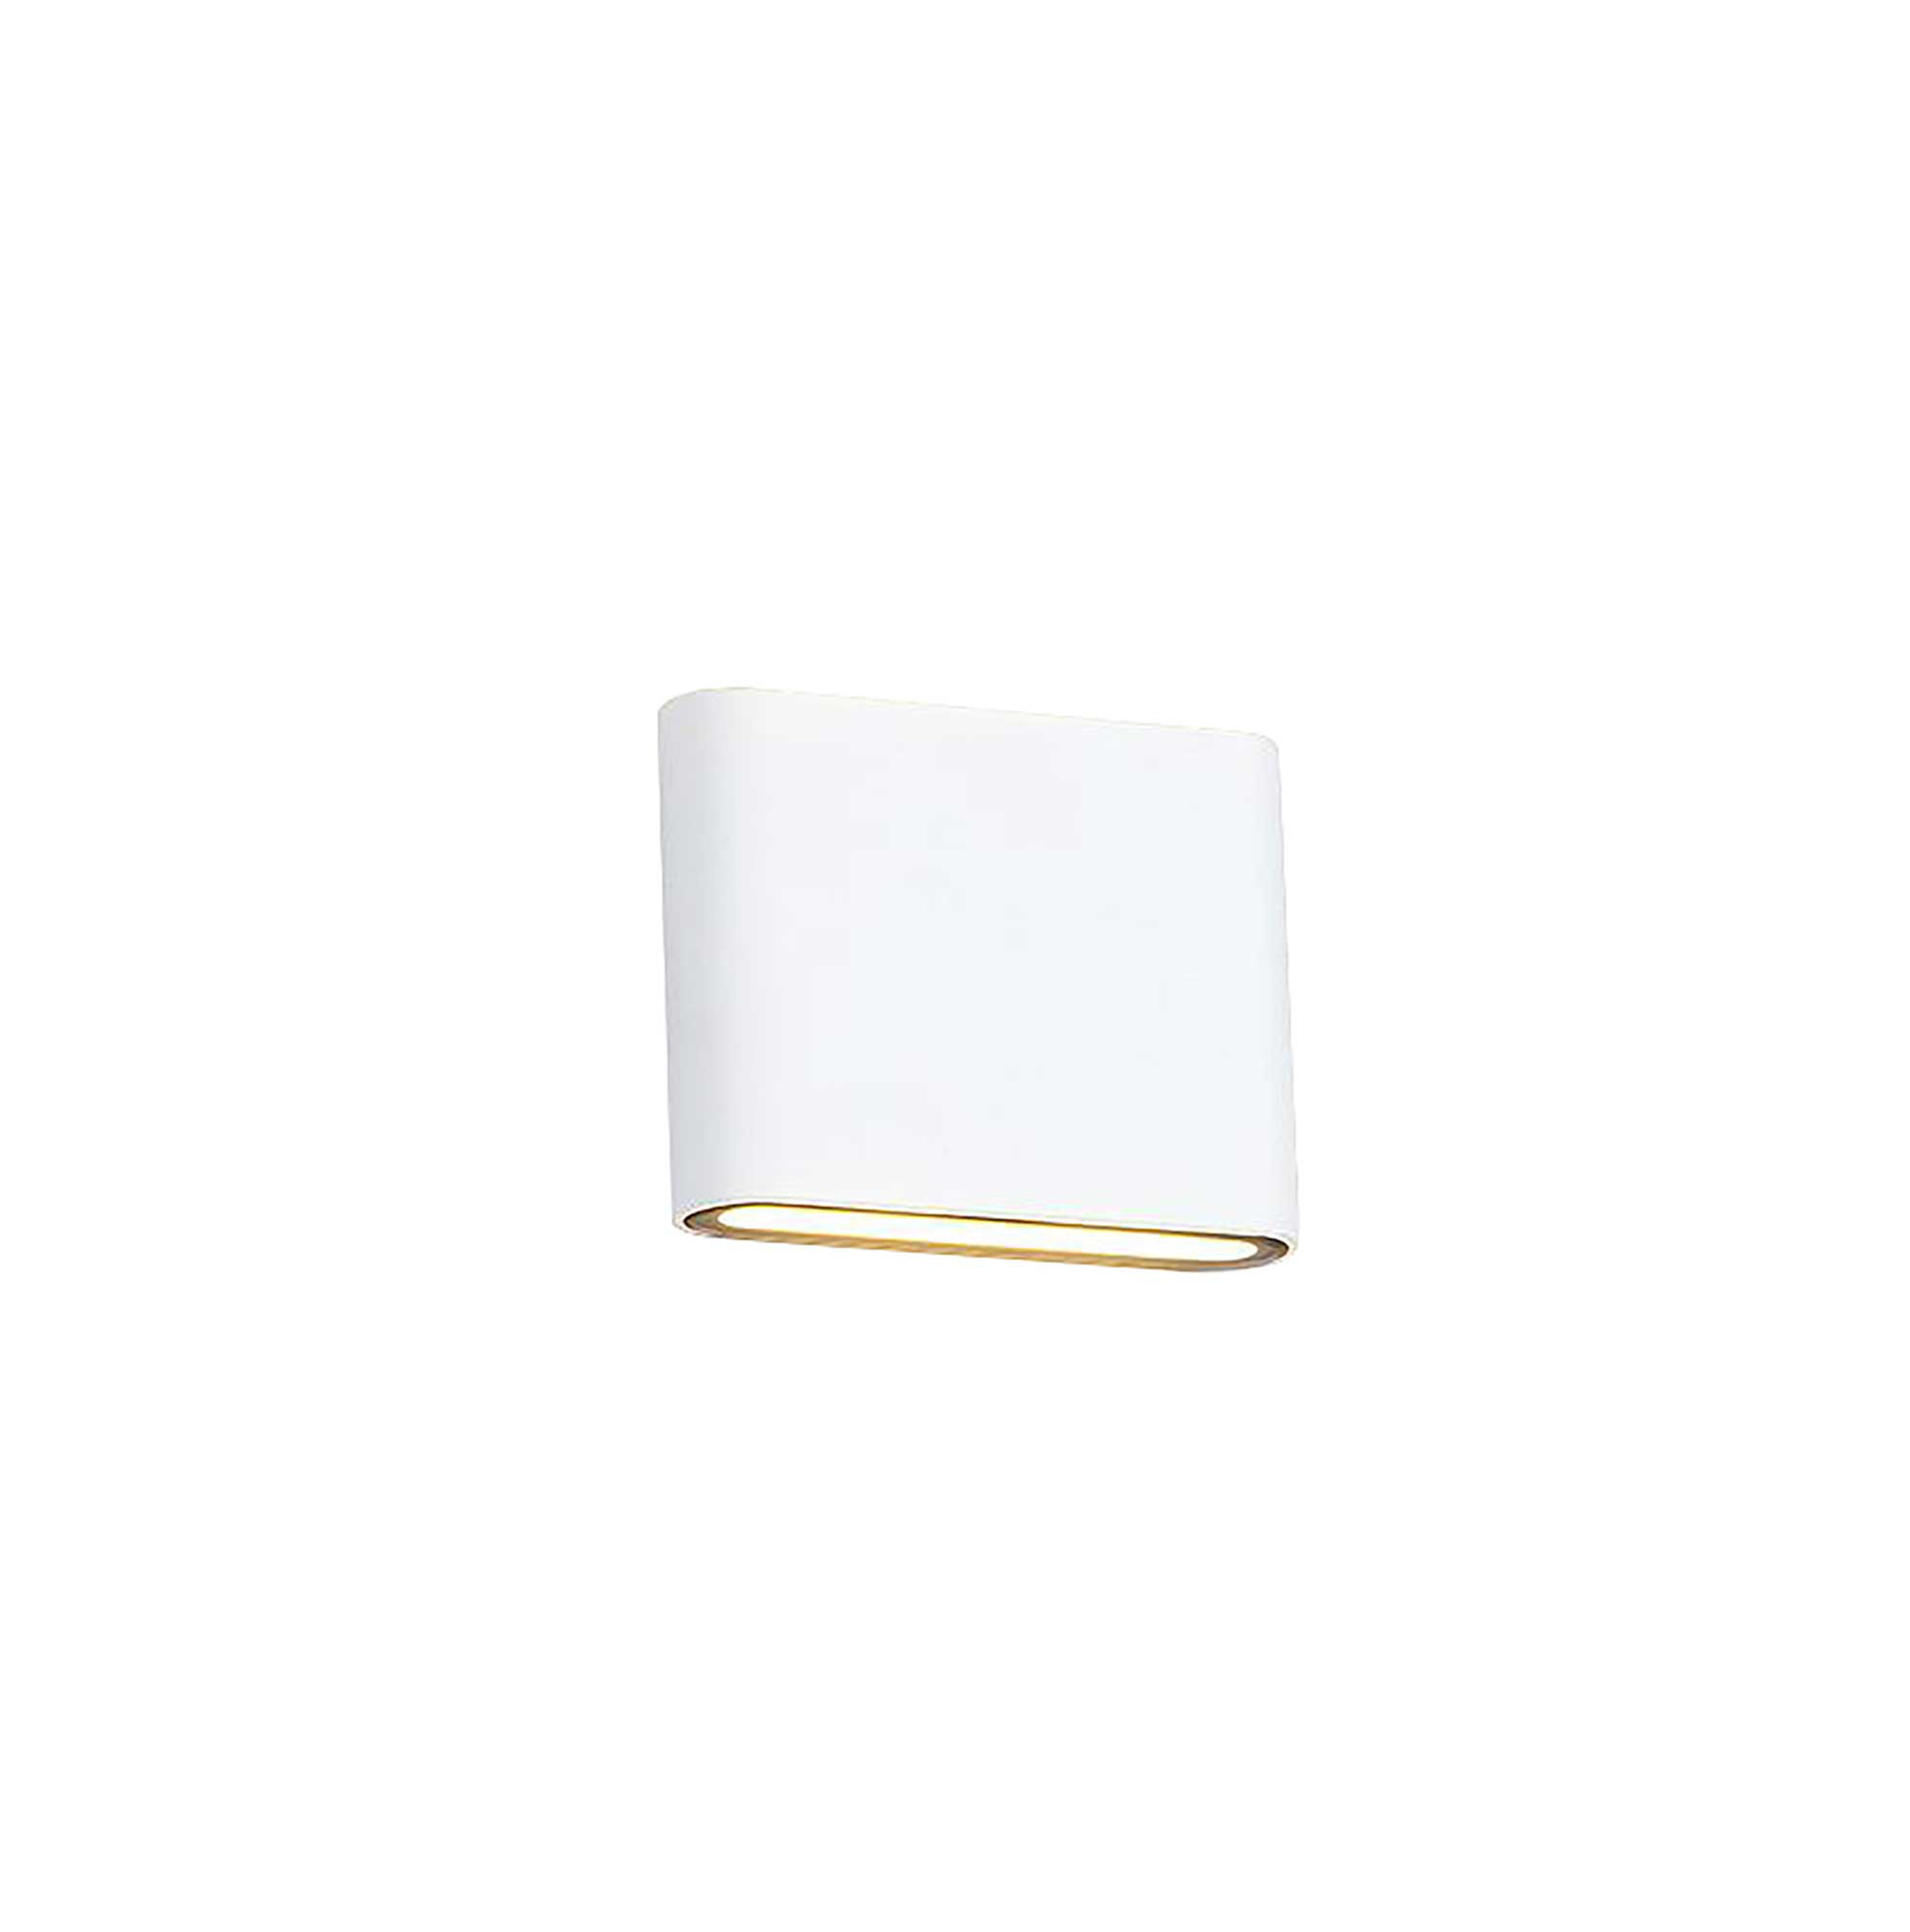 D0460  Contour Wall Lamp 2 x 3W LED Outdoor IP54 Sand White